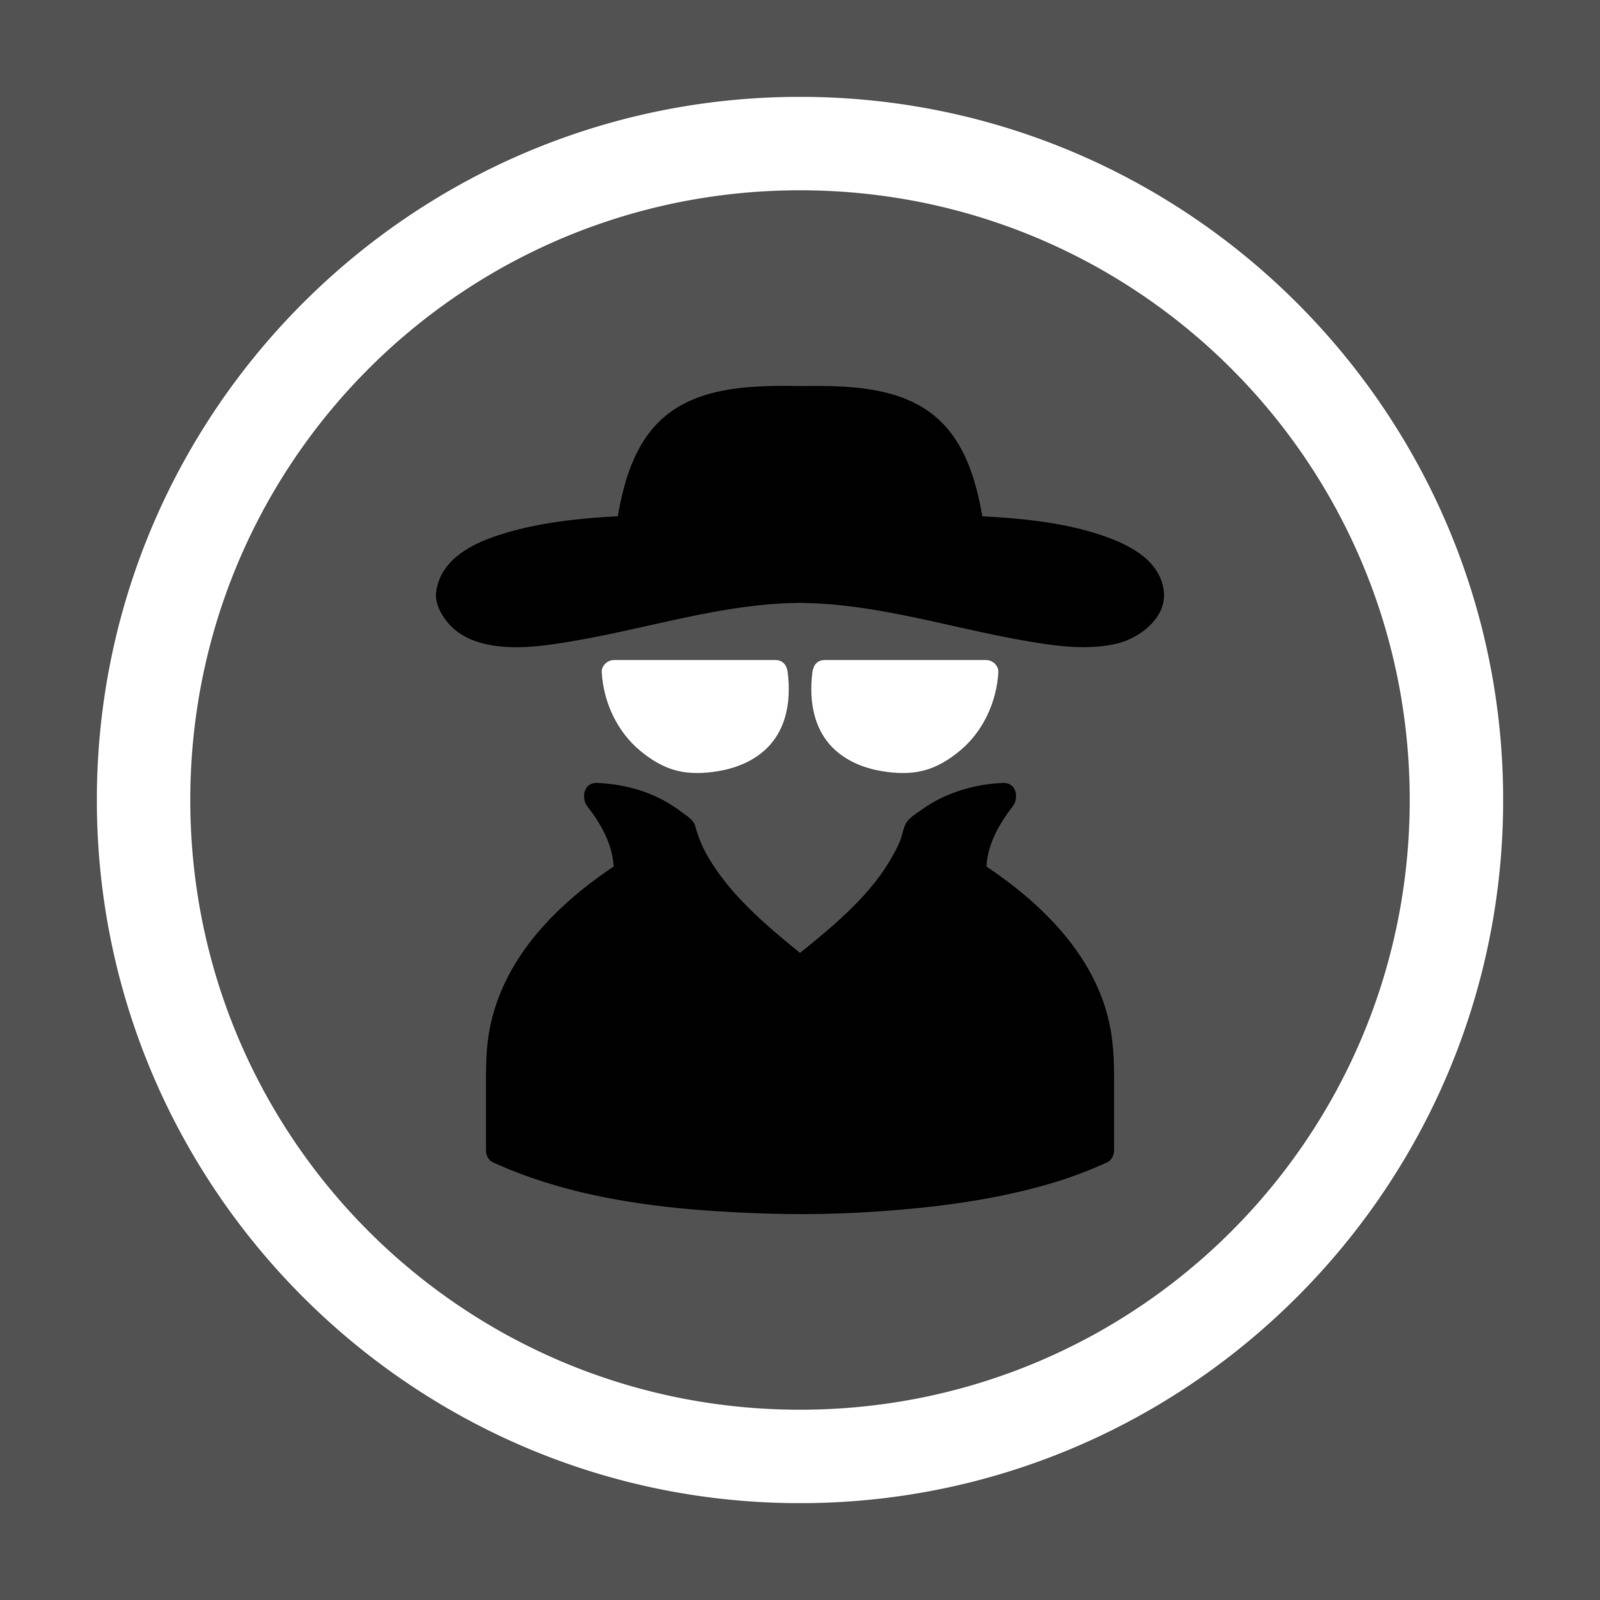 Spy vector icon. This rounded flat symbol is drawn with black and white colors on a gray background.